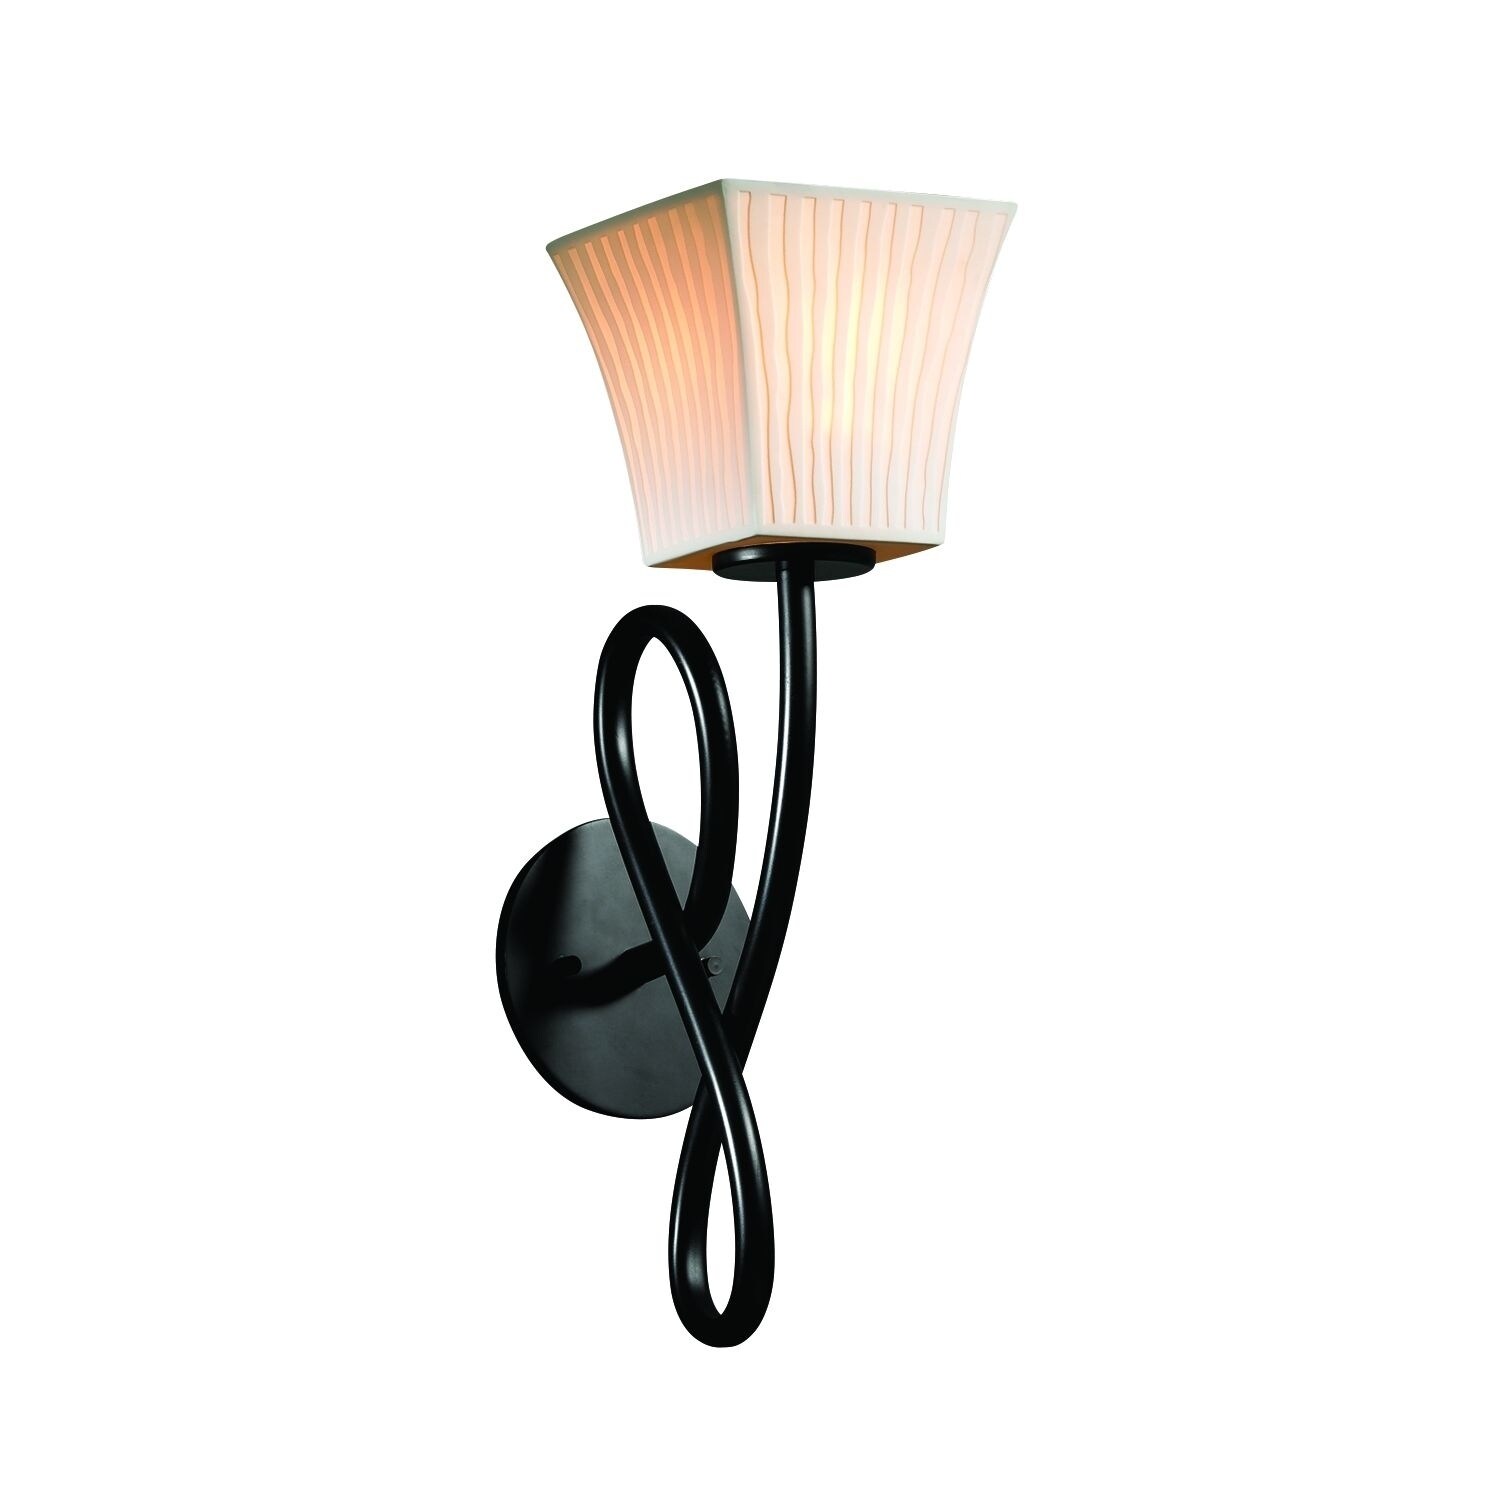 Dark Bronze Finish Patina Small 1-Light Outdoor Wall Sconce Cylinder with Flat Rim Translucent Porcelain Shade with Waves Design Limoges